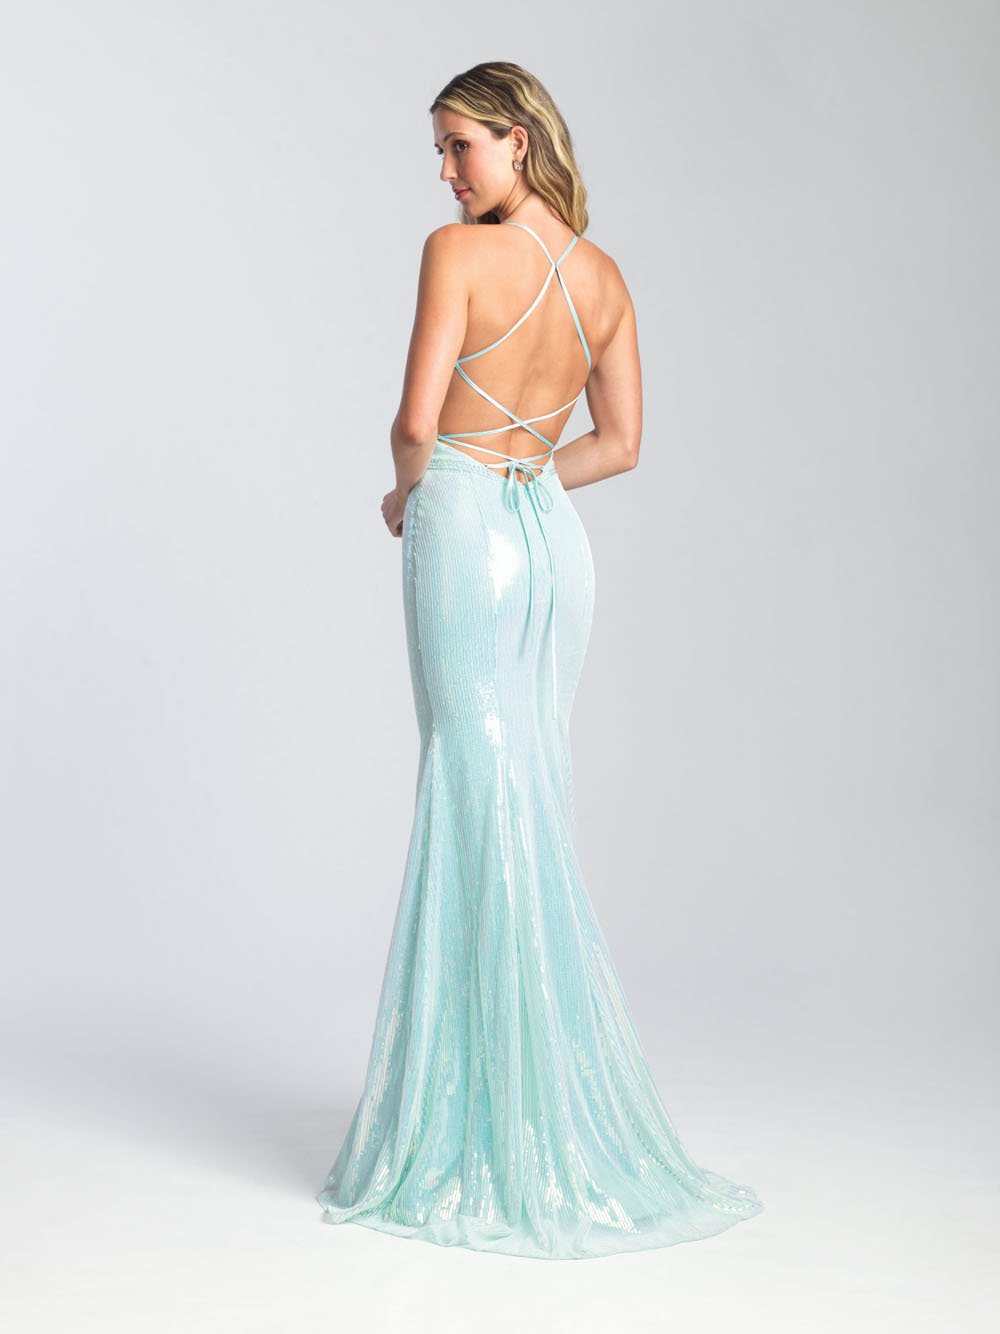 Madison James 20-345 dress images in these colors: Seafoam, Champagne.